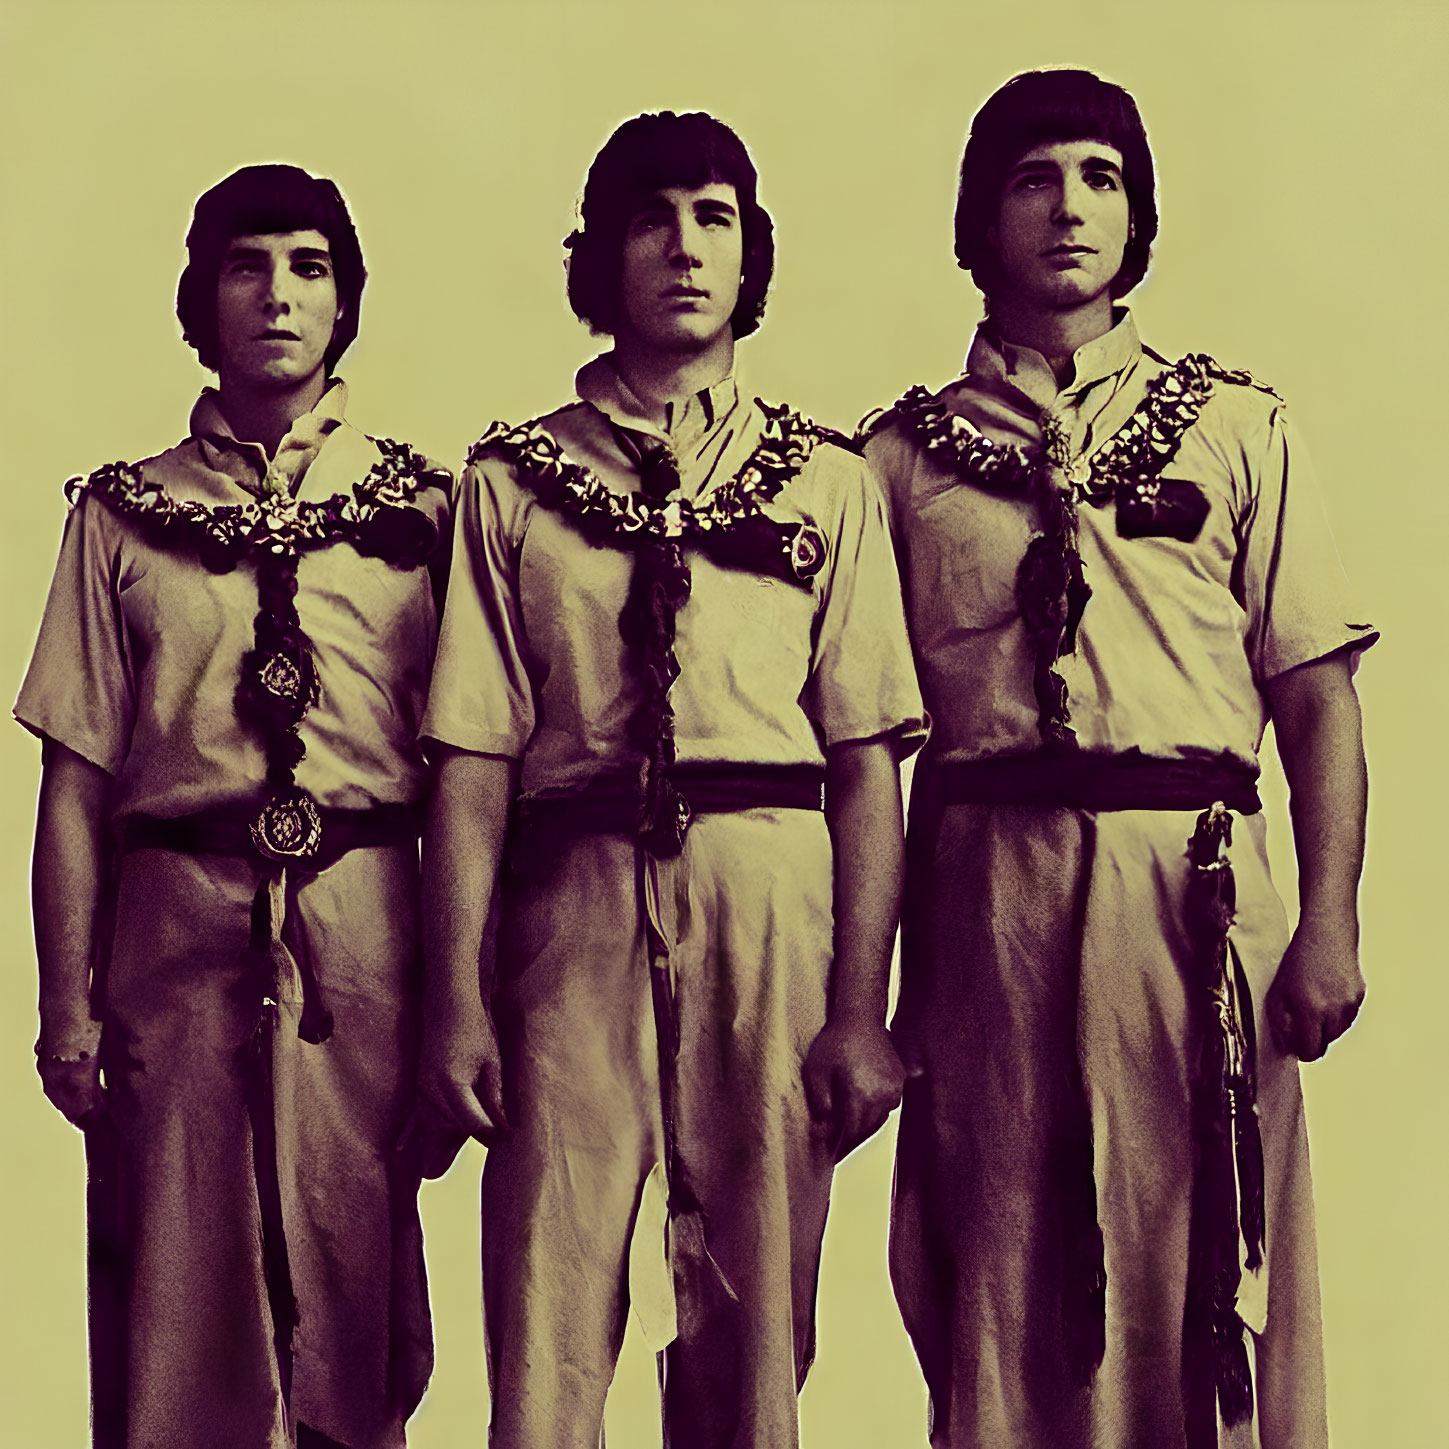 Three individuals in matching scout uniforms standing in a row